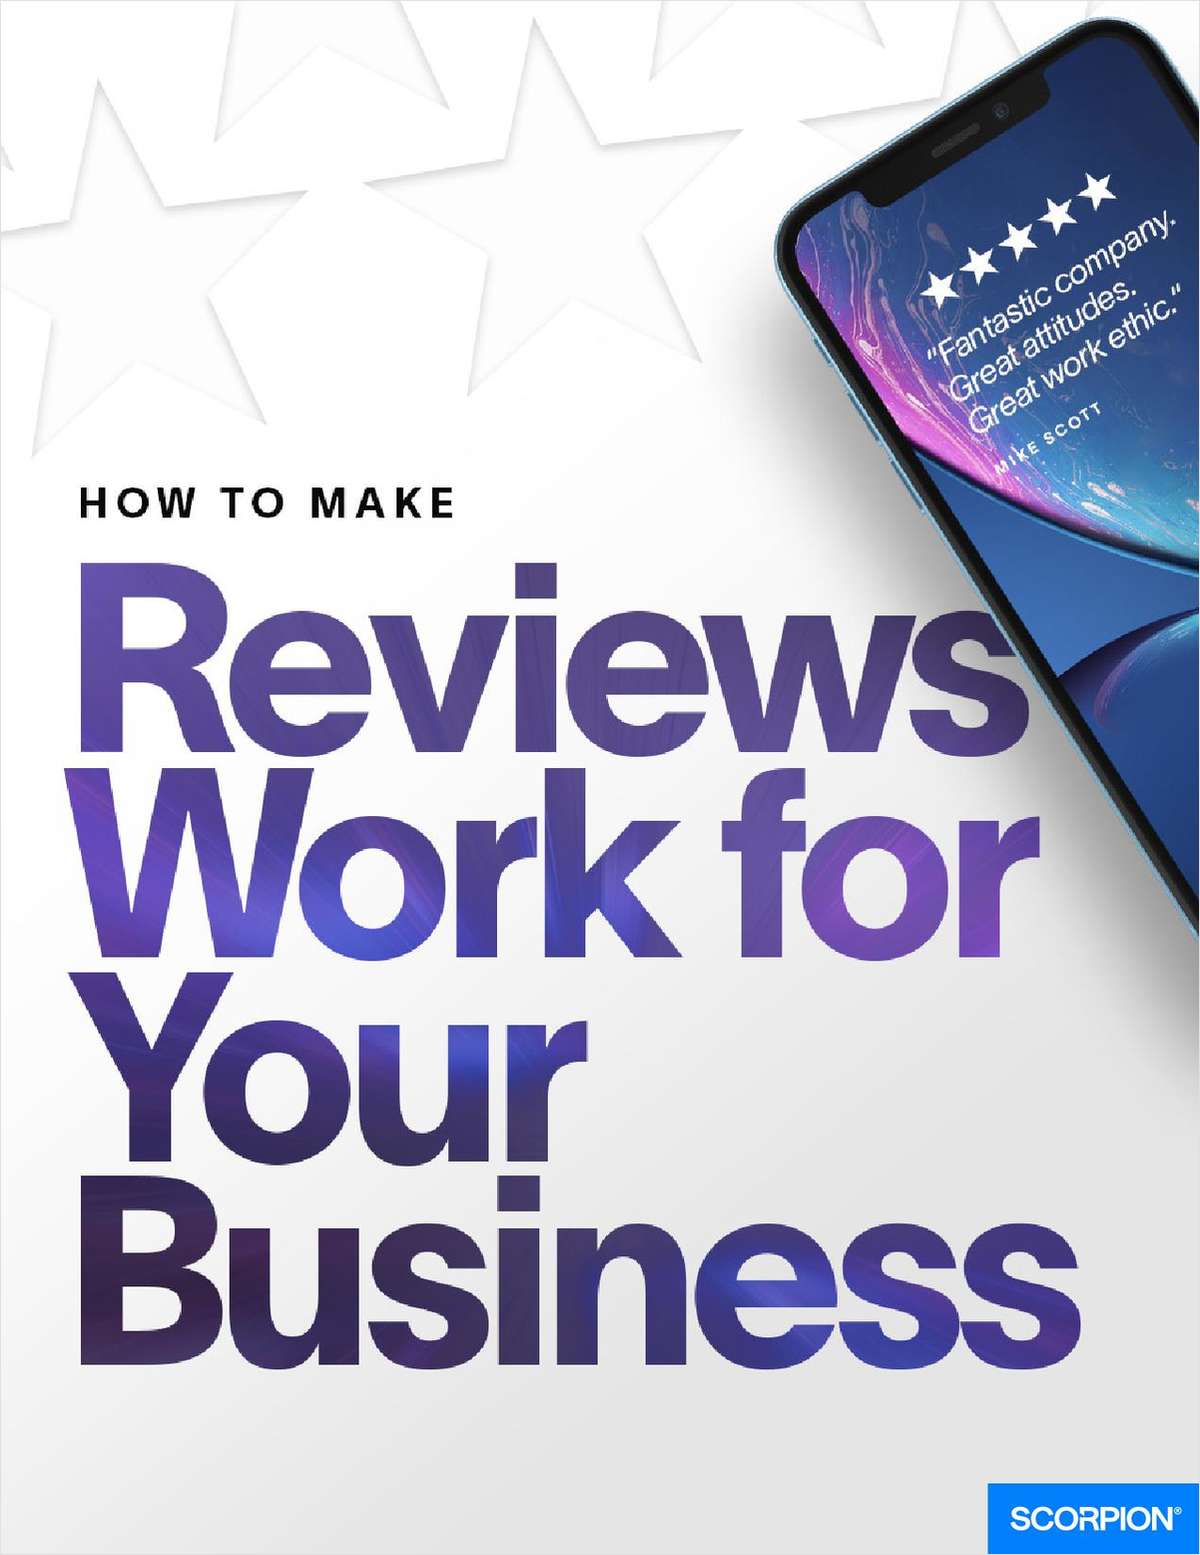 Online reviews play a big role in your efforts to get more leads and grow revenue. Download this ebook to learn how to use reviews to grow your business.